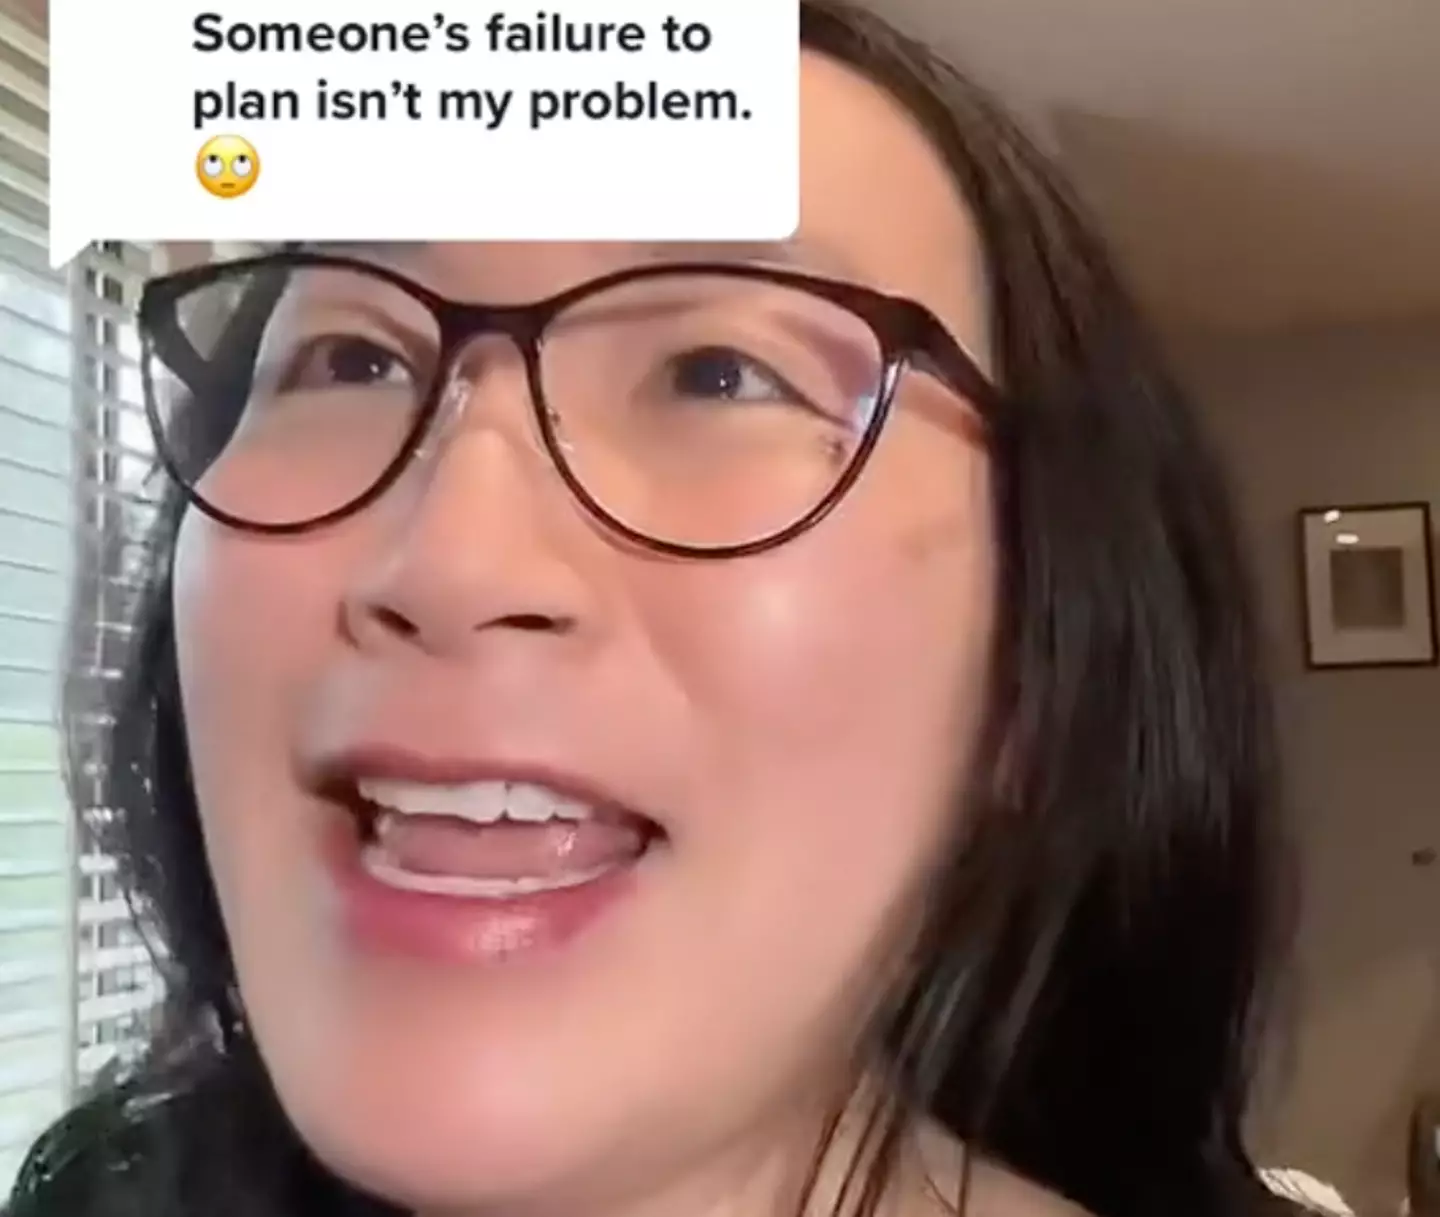 She and her neighbour spoke in different Asian languages. (TikTok / not.cristinalang)